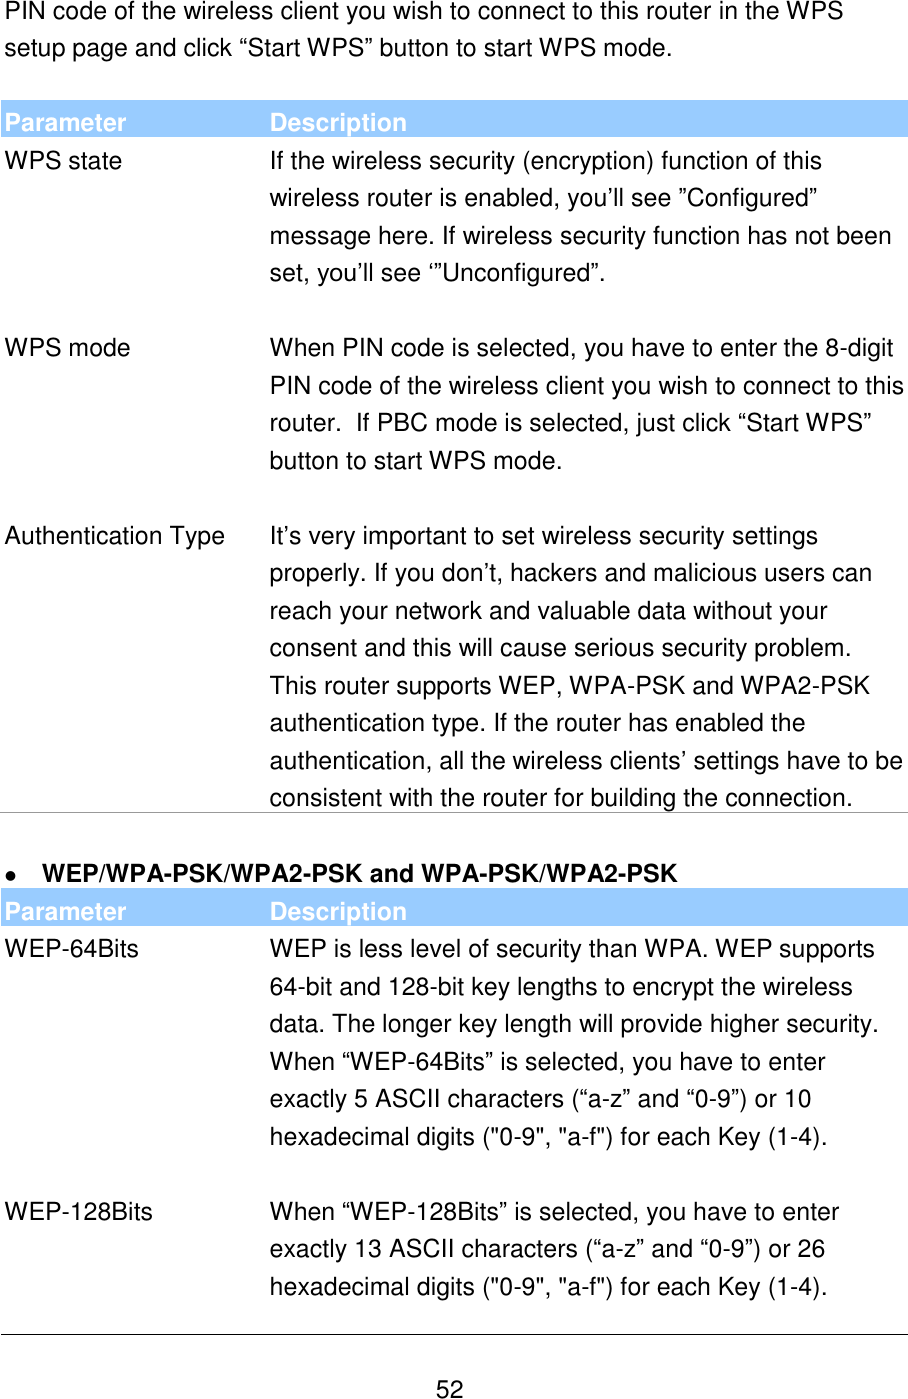   52 PIN code of the wireless client you wish to connect to this router in the WPS setup page and click “Start WPS” button to start WPS mode.   Parameter Description WPS state If the wireless security (encryption) function of this wireless router is enabled, you’ll see ”Configured” message here. If wireless security function has not been set, you’ll see ‘”Unconfigured”.   WPS mode When PIN code is selected, you have to enter the 8-digit PIN code of the wireless client you wish to connect to this router.  If PBC mode is selected, just click “Start WPS” button to start WPS mode.    Authentication Type It’s very important to set wireless security settings properly. If you don’t, hackers and malicious users can reach your network and valuable data without your consent and this will cause serious security problem. This router supports WEP, WPA-PSK and WPA2-PSK authentication type. If the router has enabled the authentication, all the wireless clients’ settings have to be consistent with the router for building the connection.   WEP/WPA-PSK/WPA2-PSK and WPA-PSK/WPA2-PSK Parameter Description WEP-64Bits WEP is less level of security than WPA. WEP supports 64-bit and 128-bit key lengths to encrypt the wireless data. The longer key length will provide higher security. When “WEP-64Bits” is selected, you have to enter exactly 5 ASCII characters (“a-z” and “0-9”) or 10 hexadecimal digits (&quot;0-9&quot;, &quot;a-f&quot;) for each Key (1-4).   WEP-128Bits When “WEP-128Bits” is selected, you have to enter exactly 13 ASCII characters (“a-z” and “0-9”) or 26 hexadecimal digits (&quot;0-9&quot;, &quot;a-f&quot;) for each Key (1-4). 